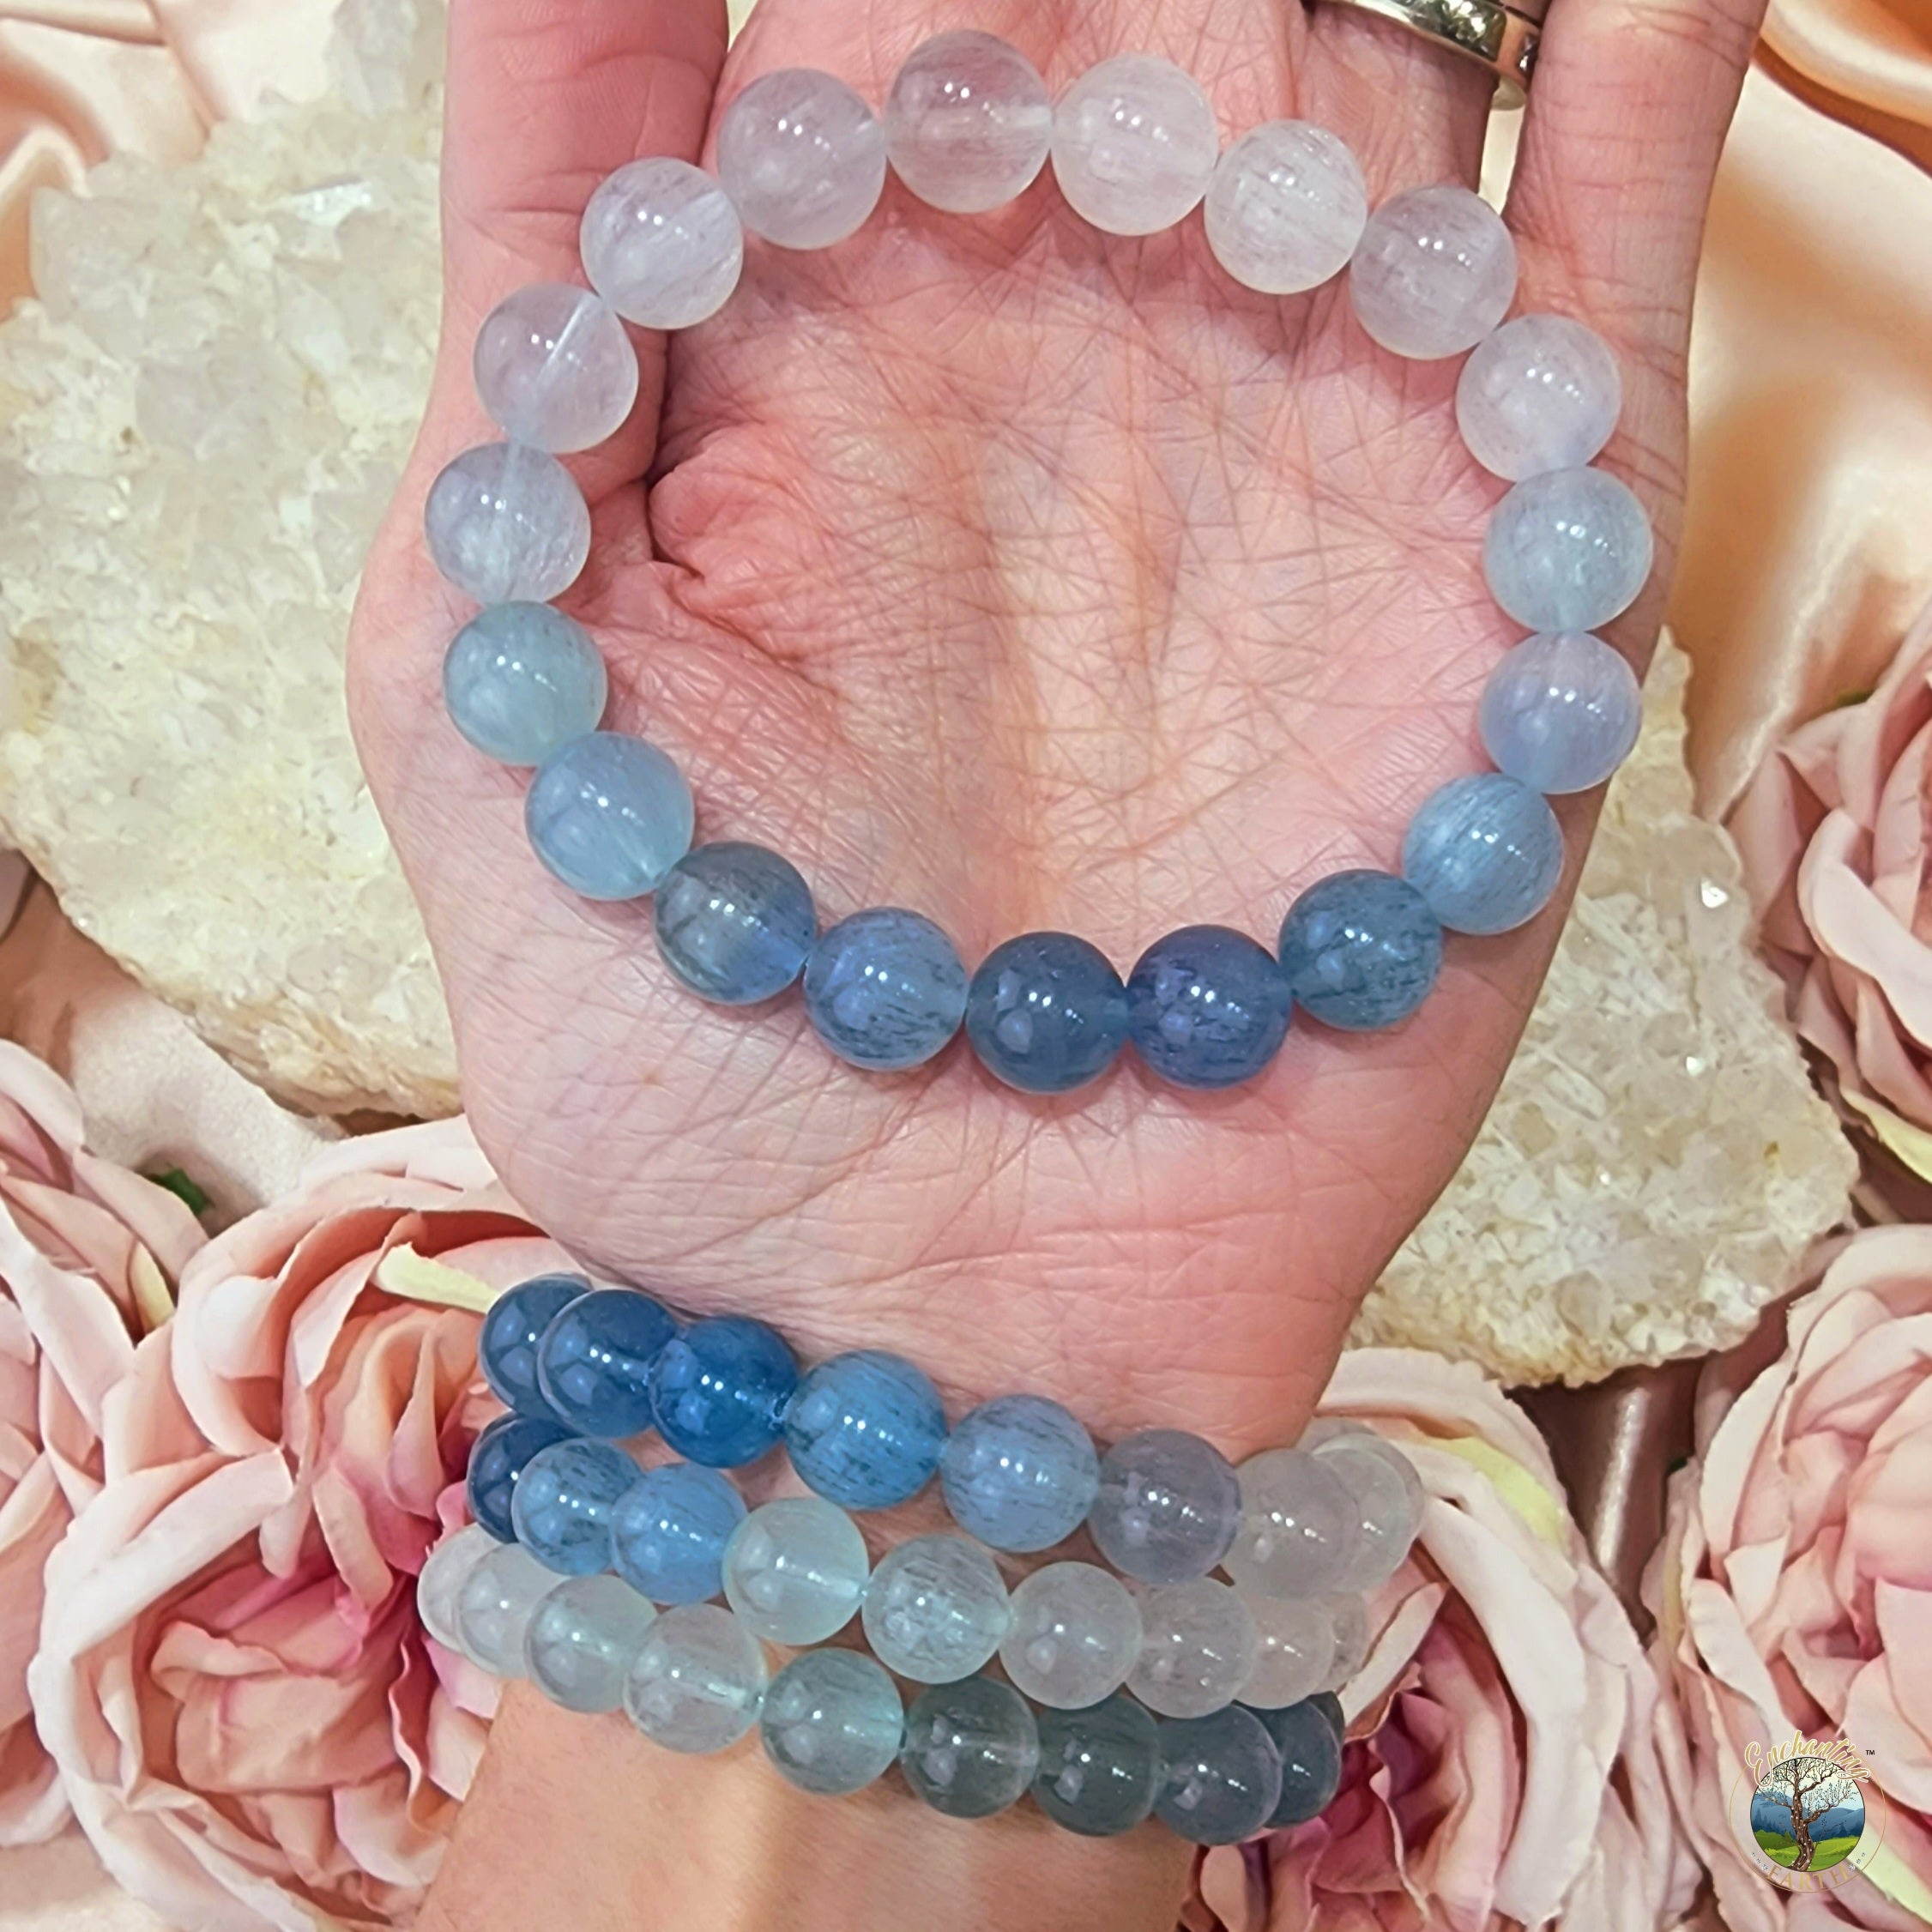 Blue Fluorite Waterfall Bracelet (AAA Grade) for Third Eye Activation & Psychic Clarity